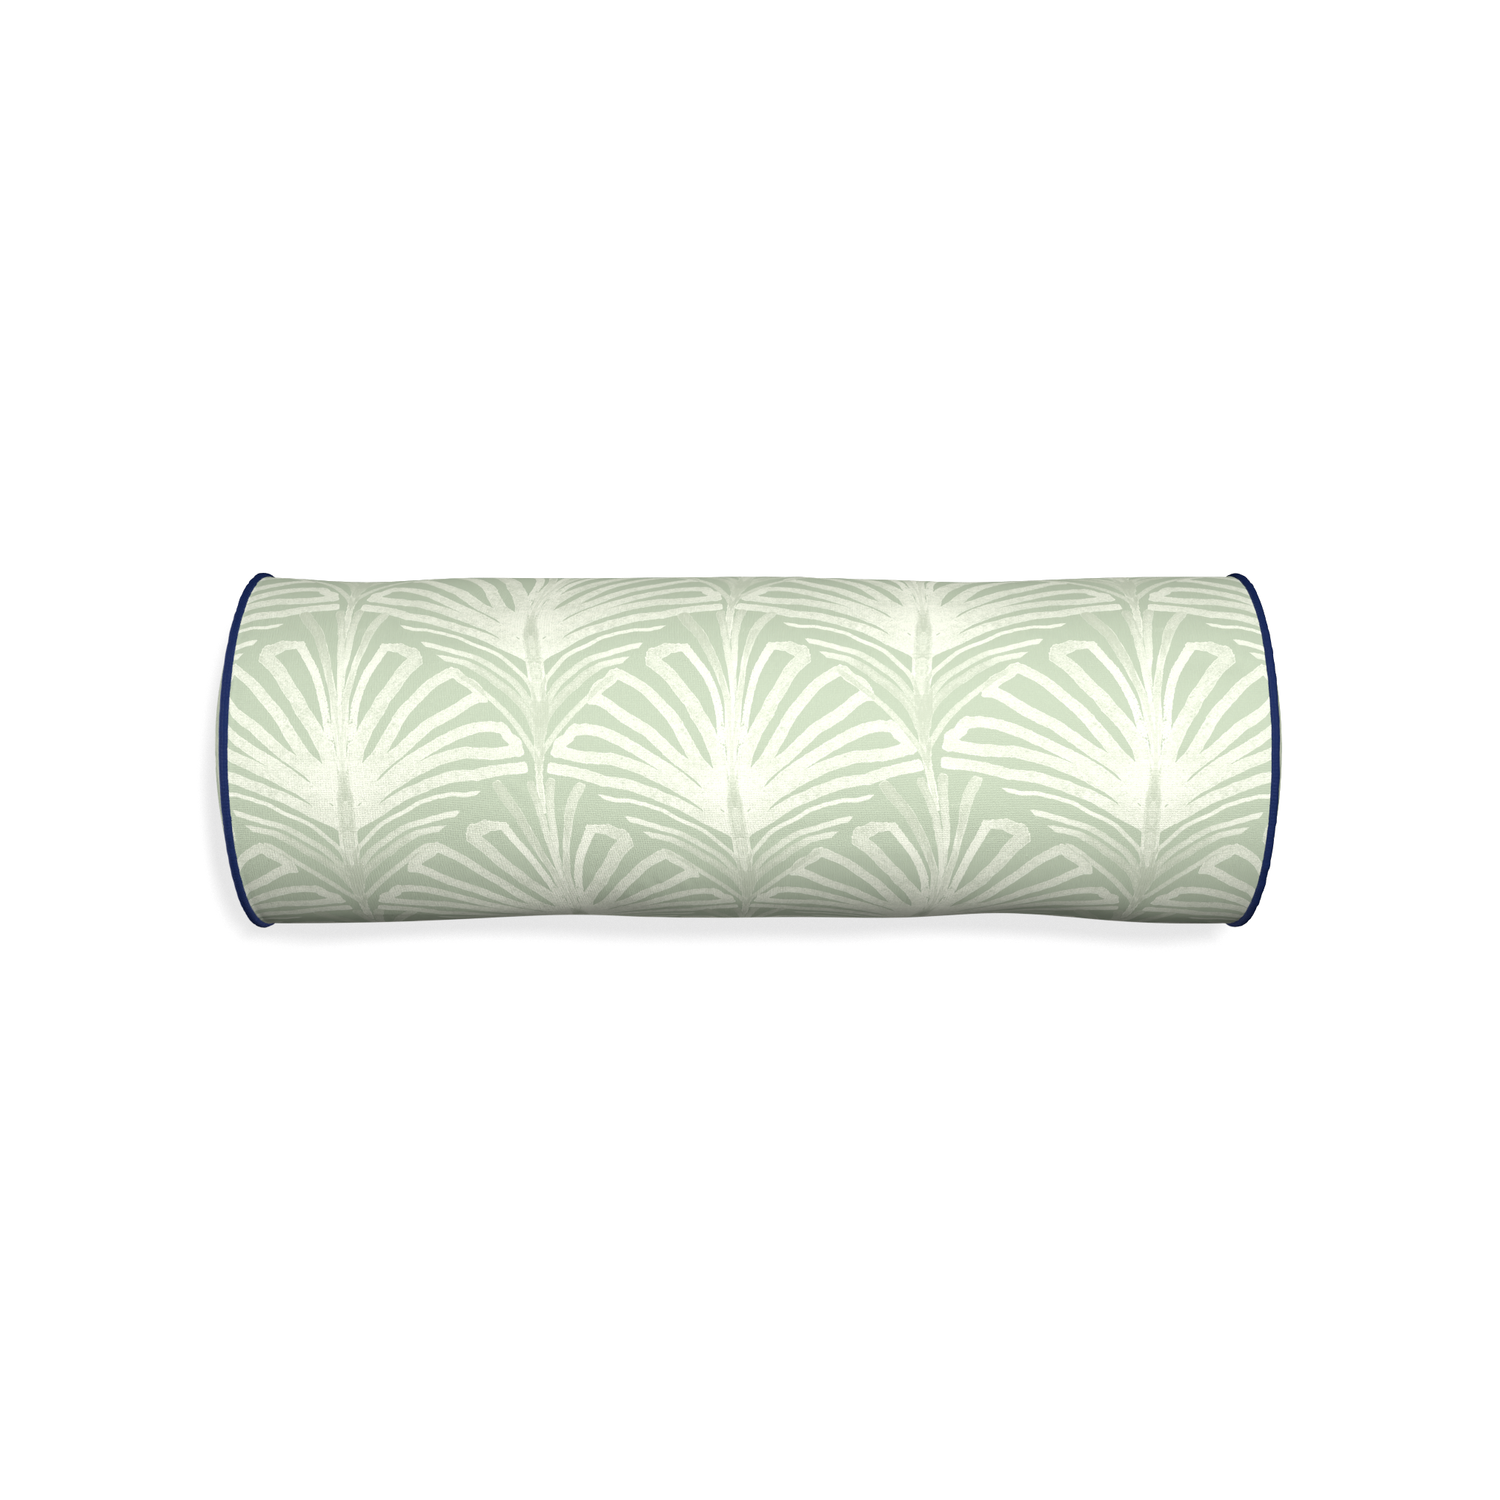 Bolster suzy sage custom sage green palmpillow with midnight piping on white background